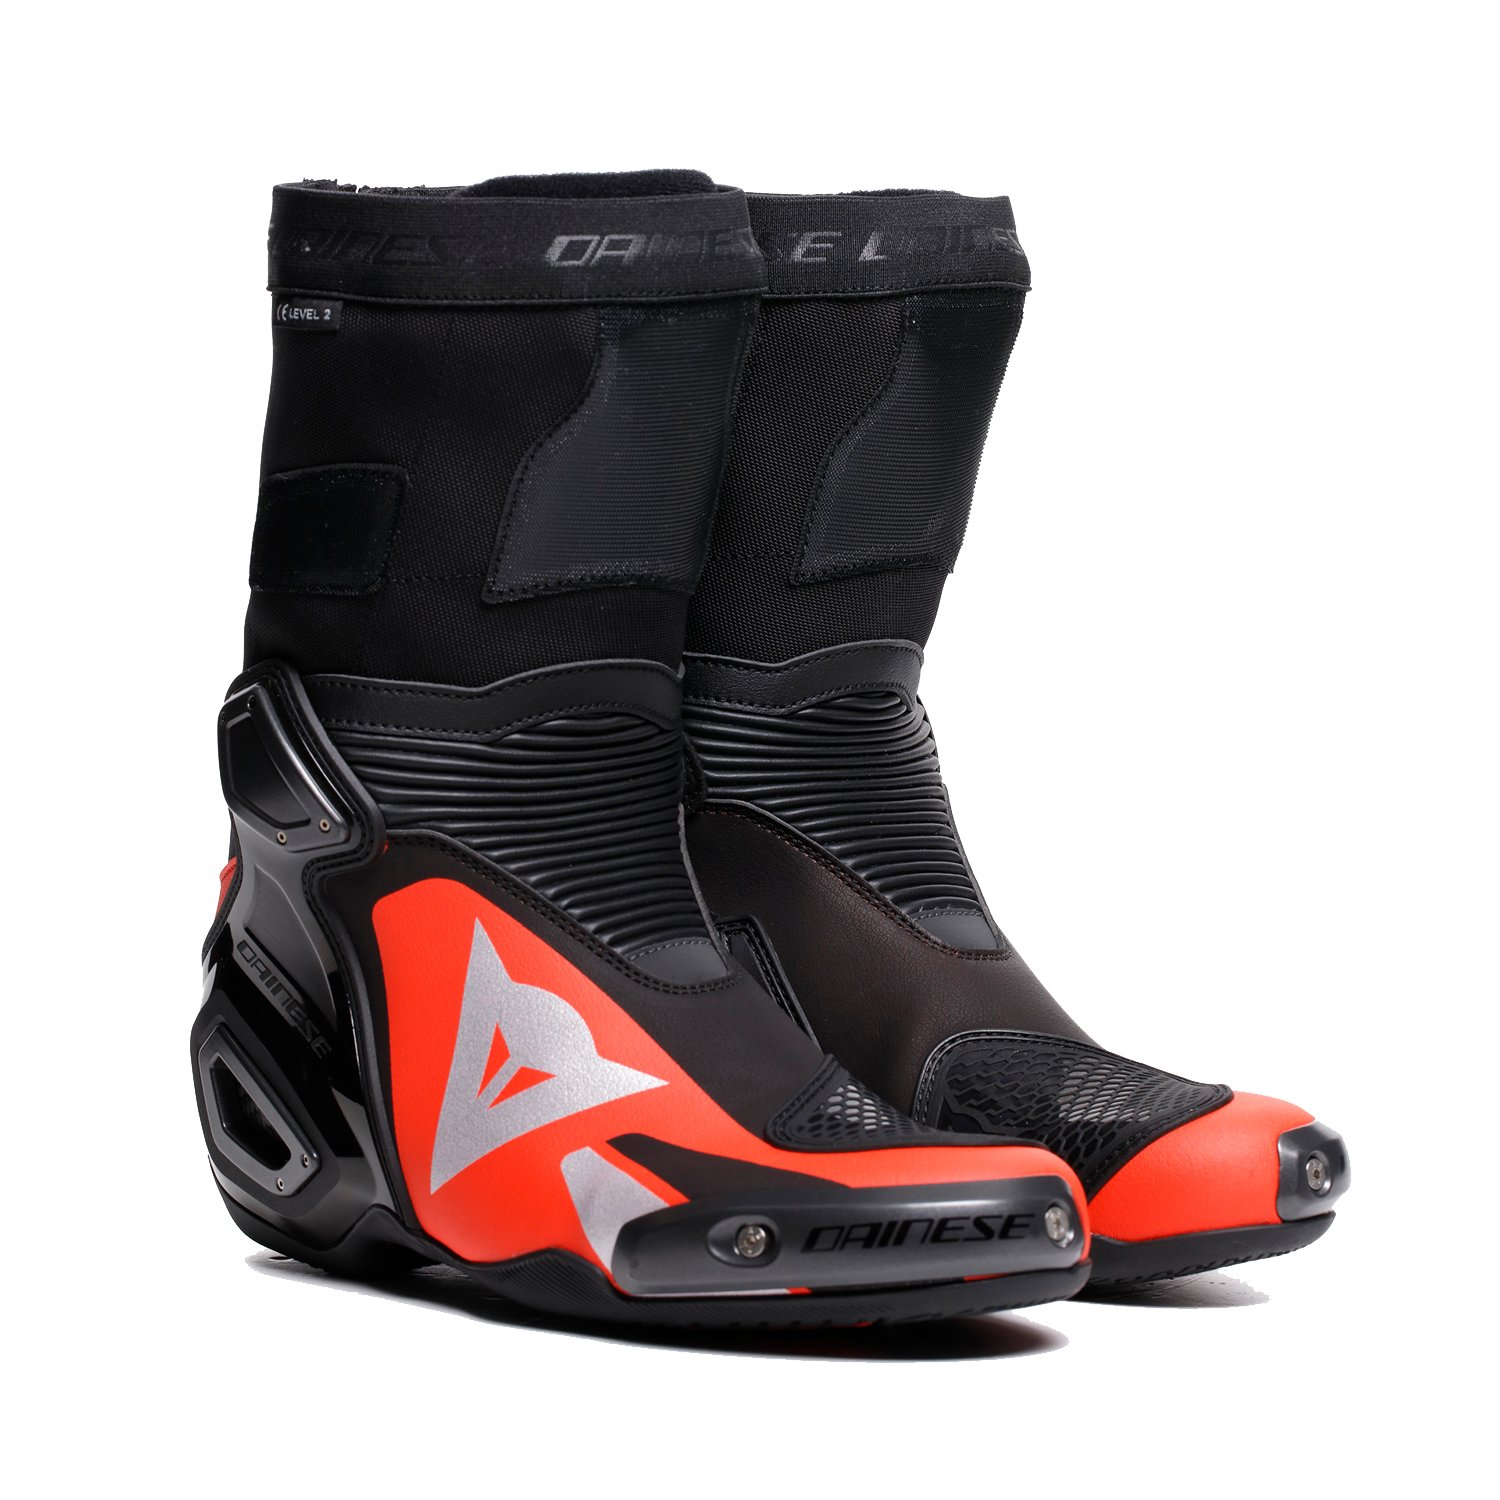 Image of Dainese Axial 2 Boots Black Red Fluo Size 40 EN